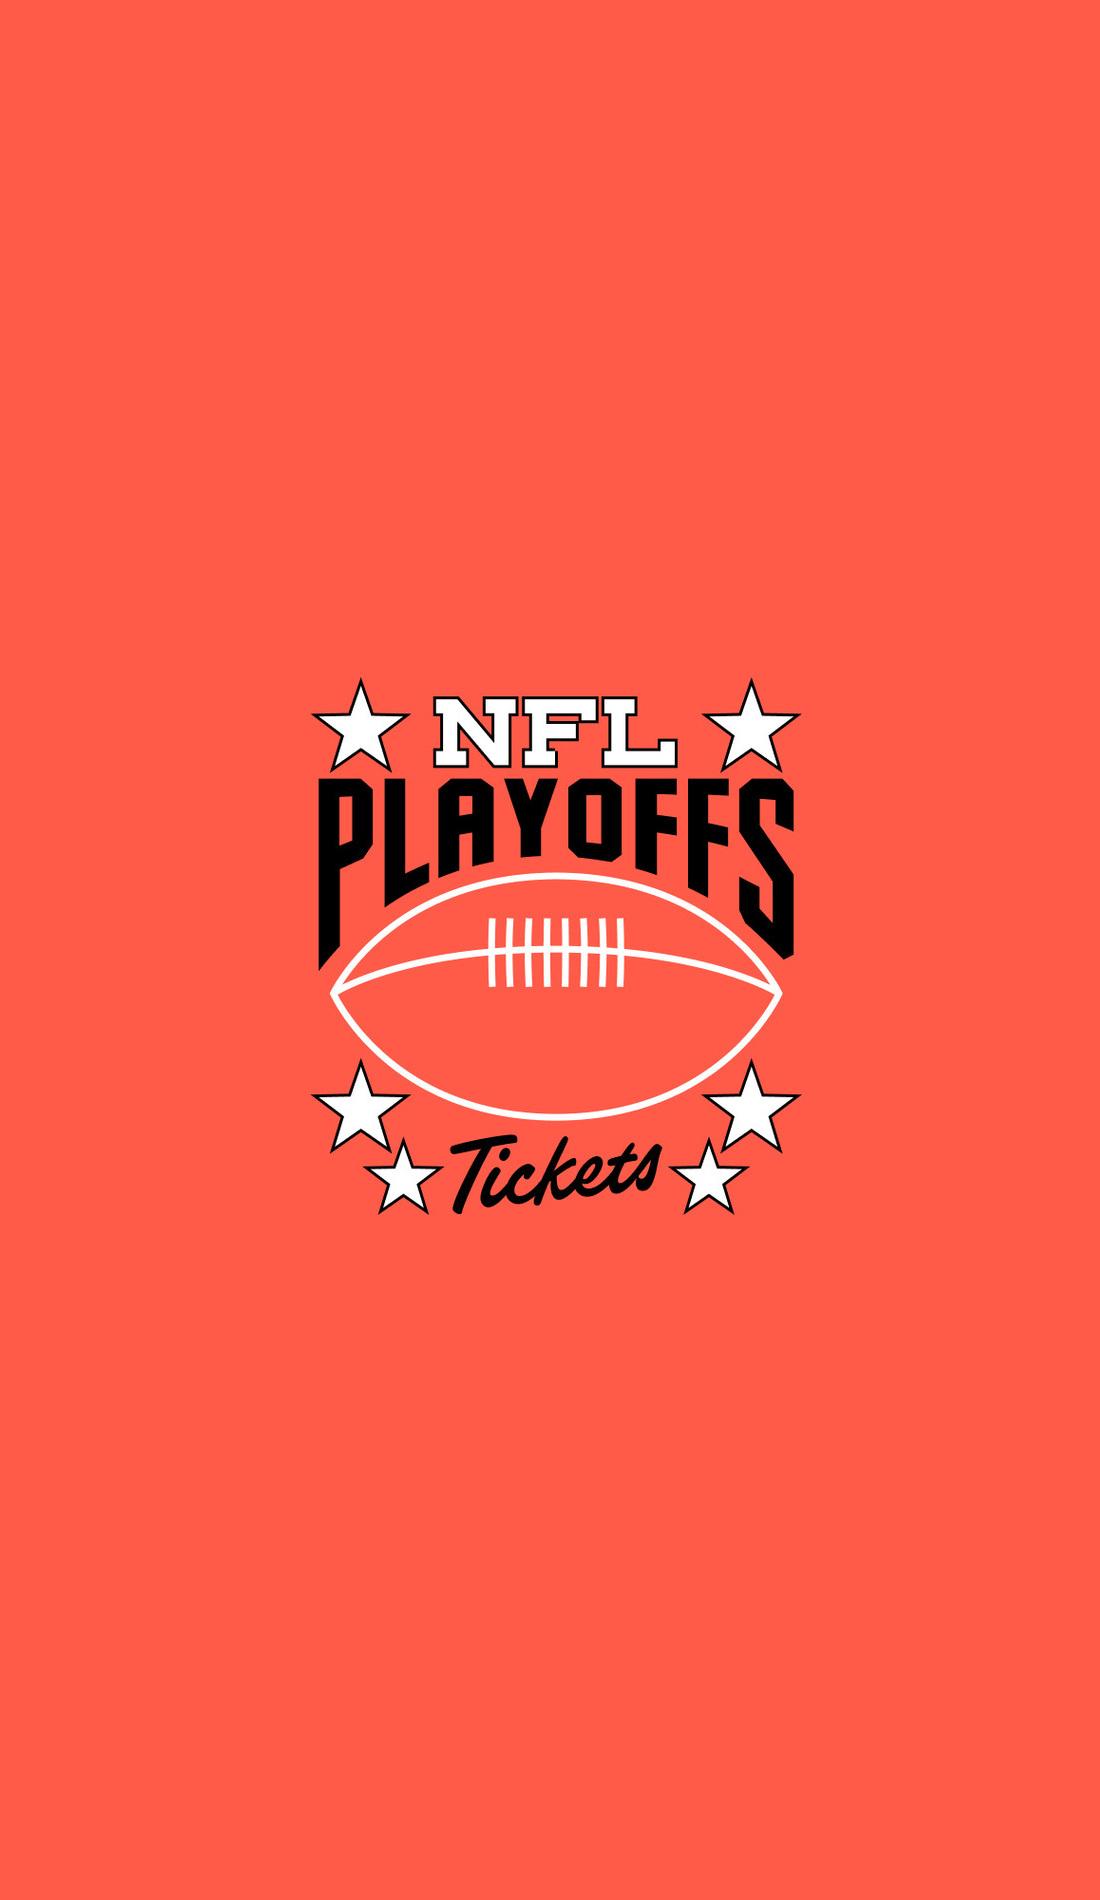 NFL playoffs: Tickets still available to see the San Francisco